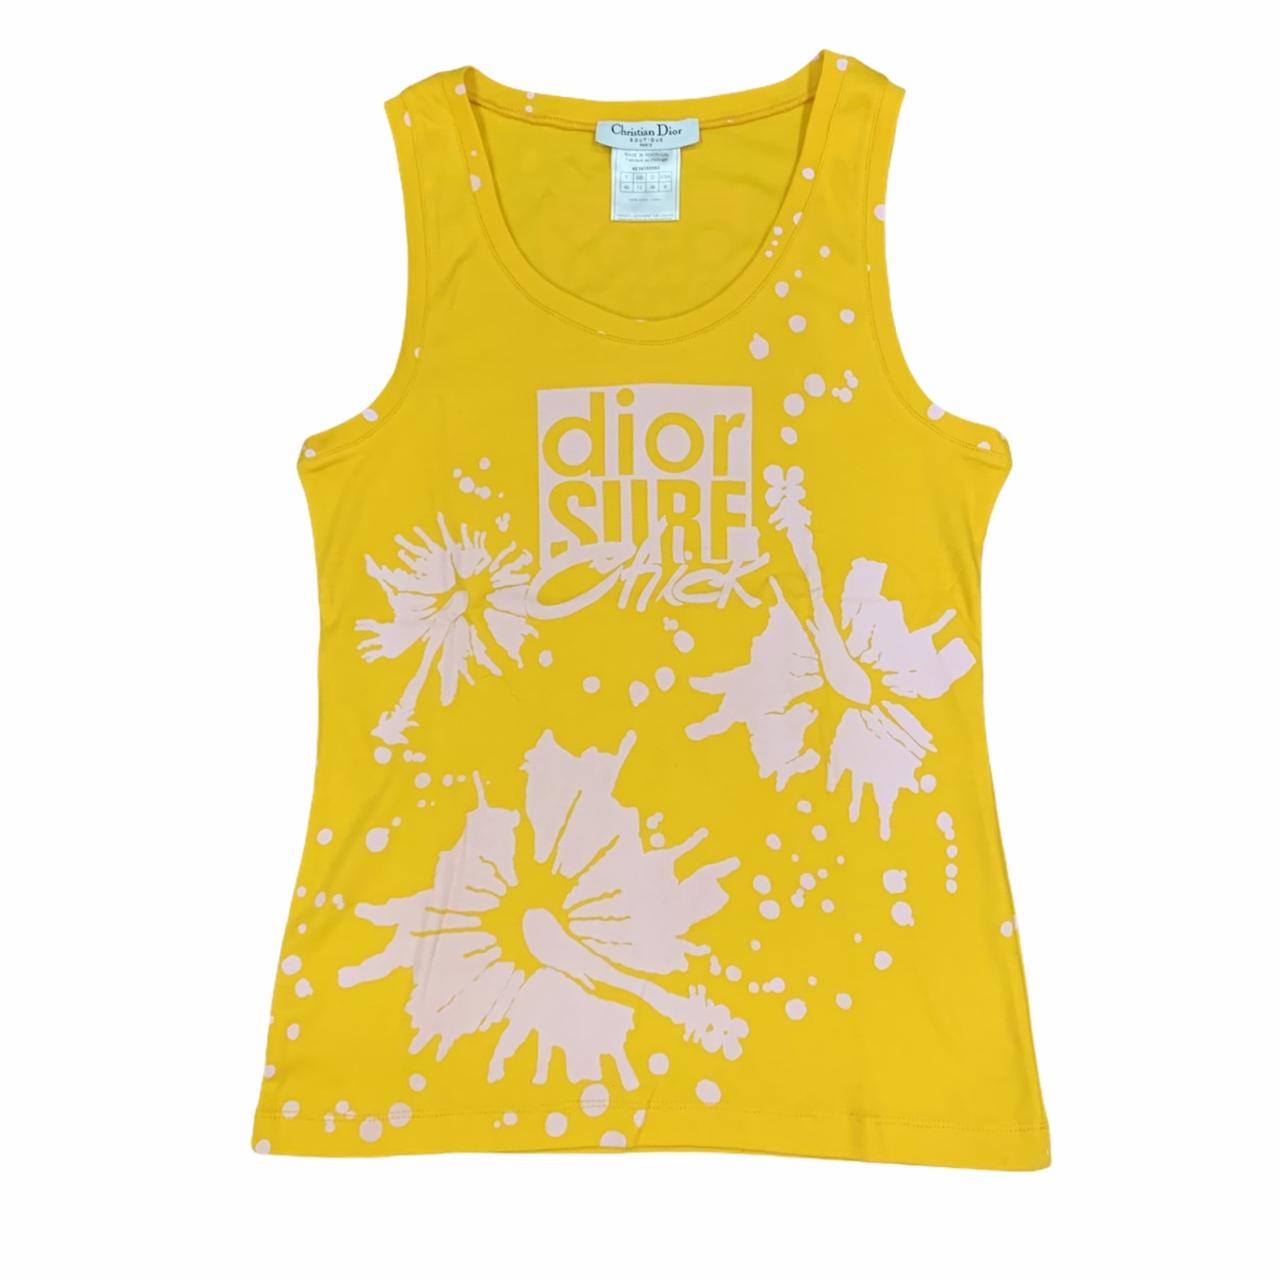 Christian Dior SS2004 ‘Surf Chick’ hibiscus tank...